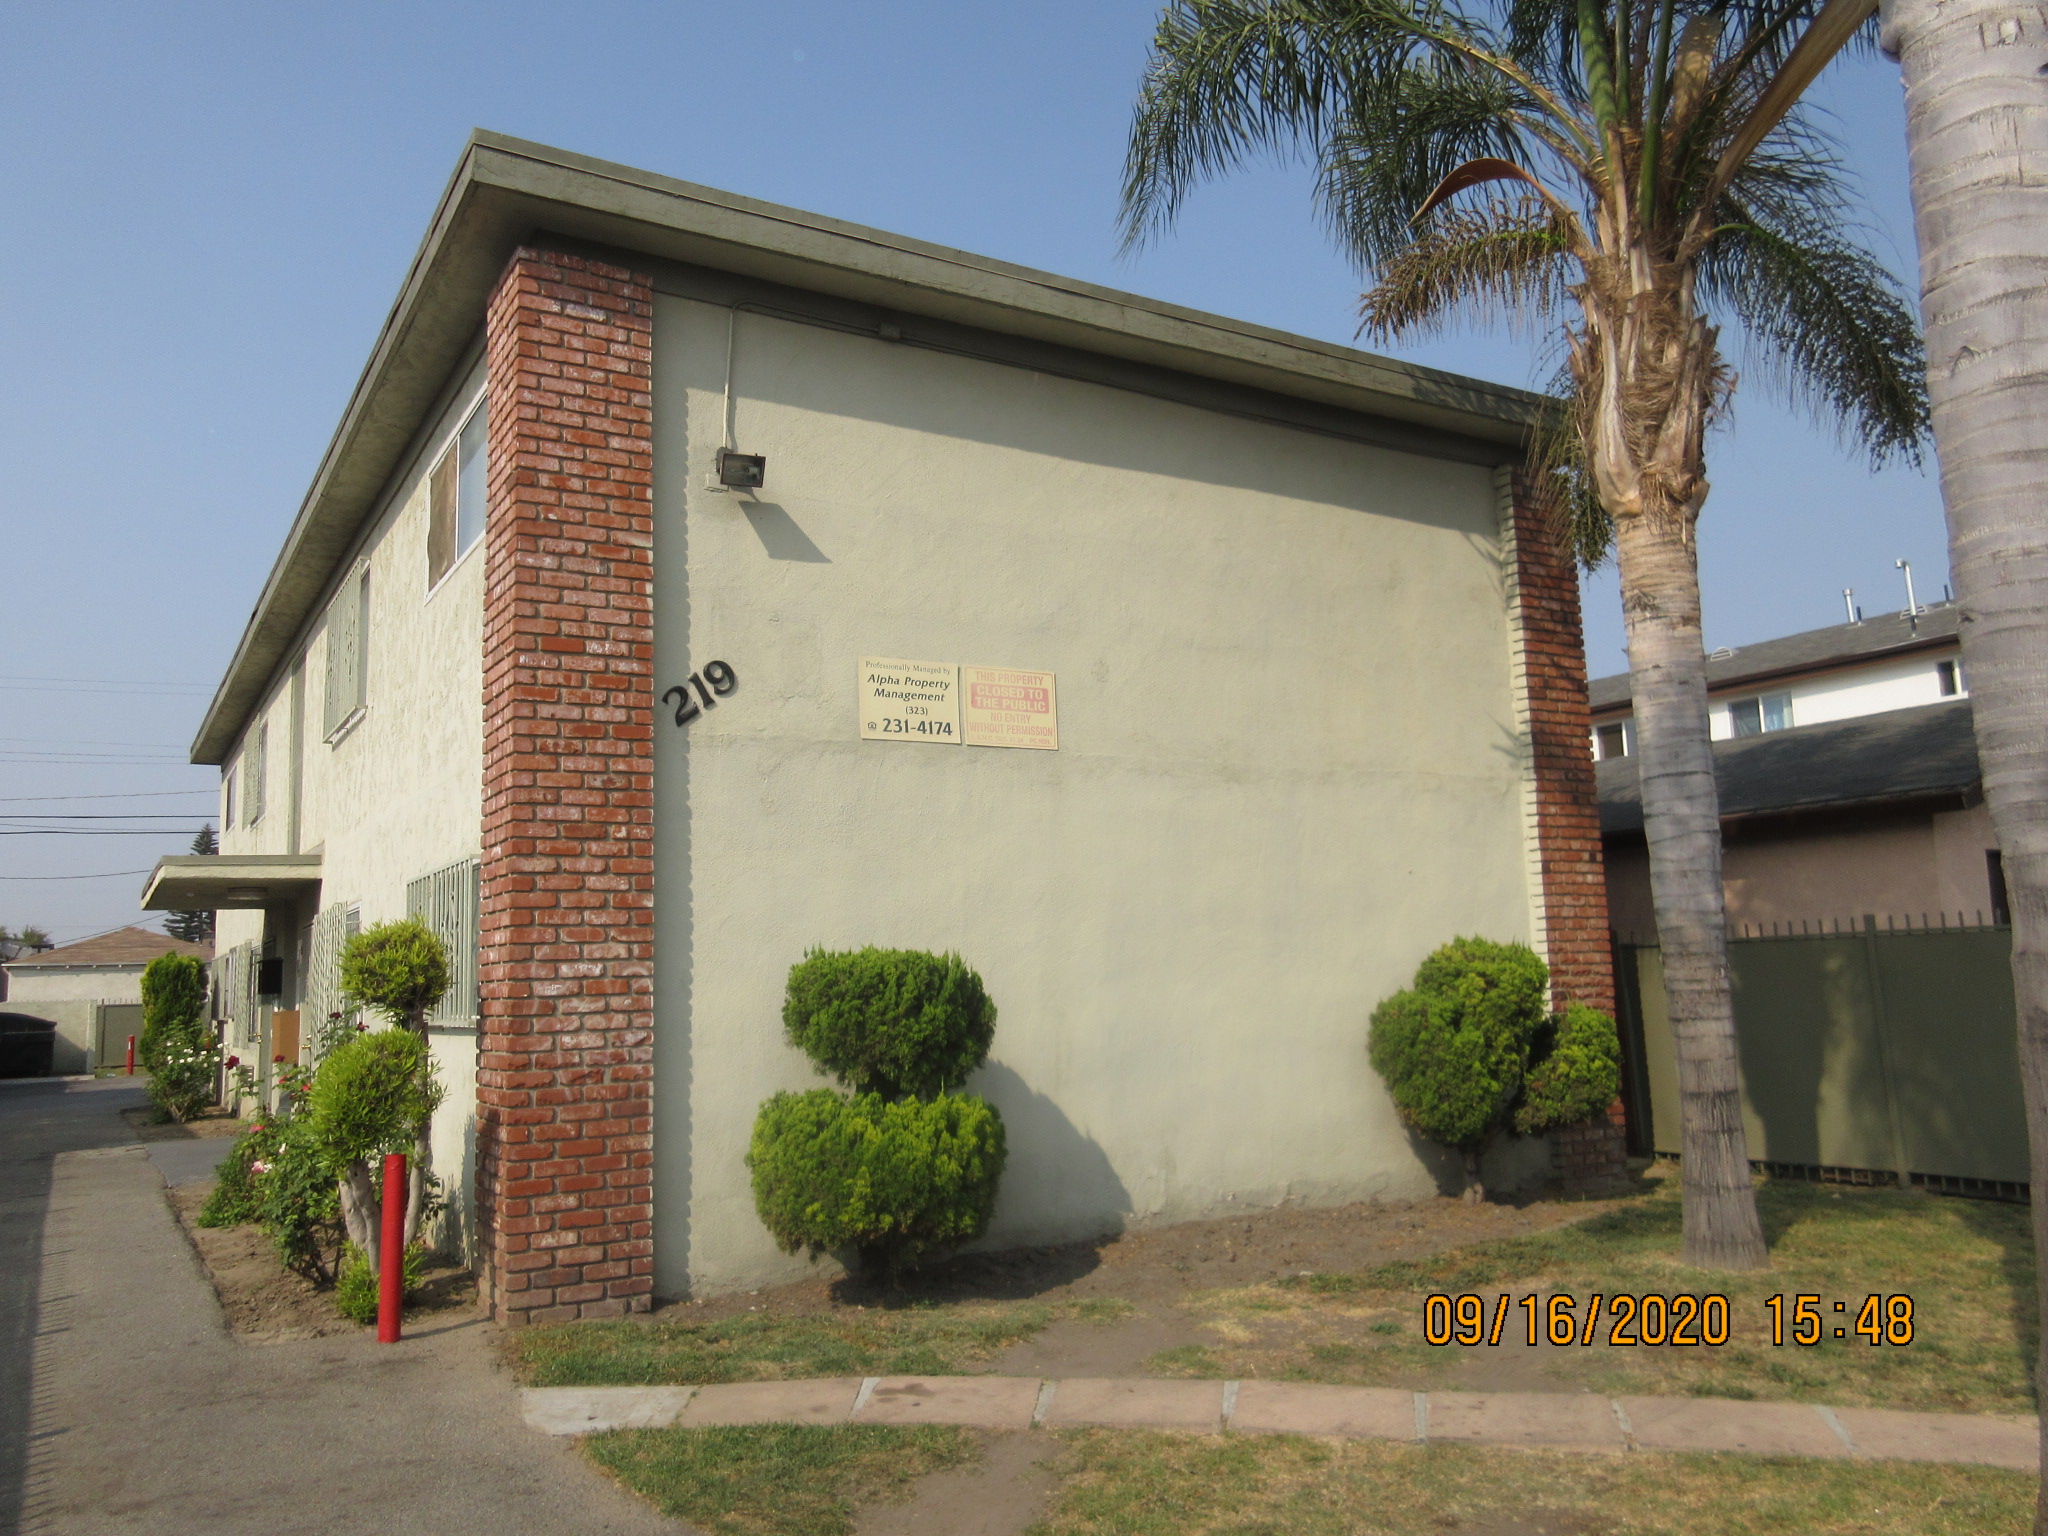 Right side view of a light green two story building, building number and management signs on the wall, palm trees and bushes.